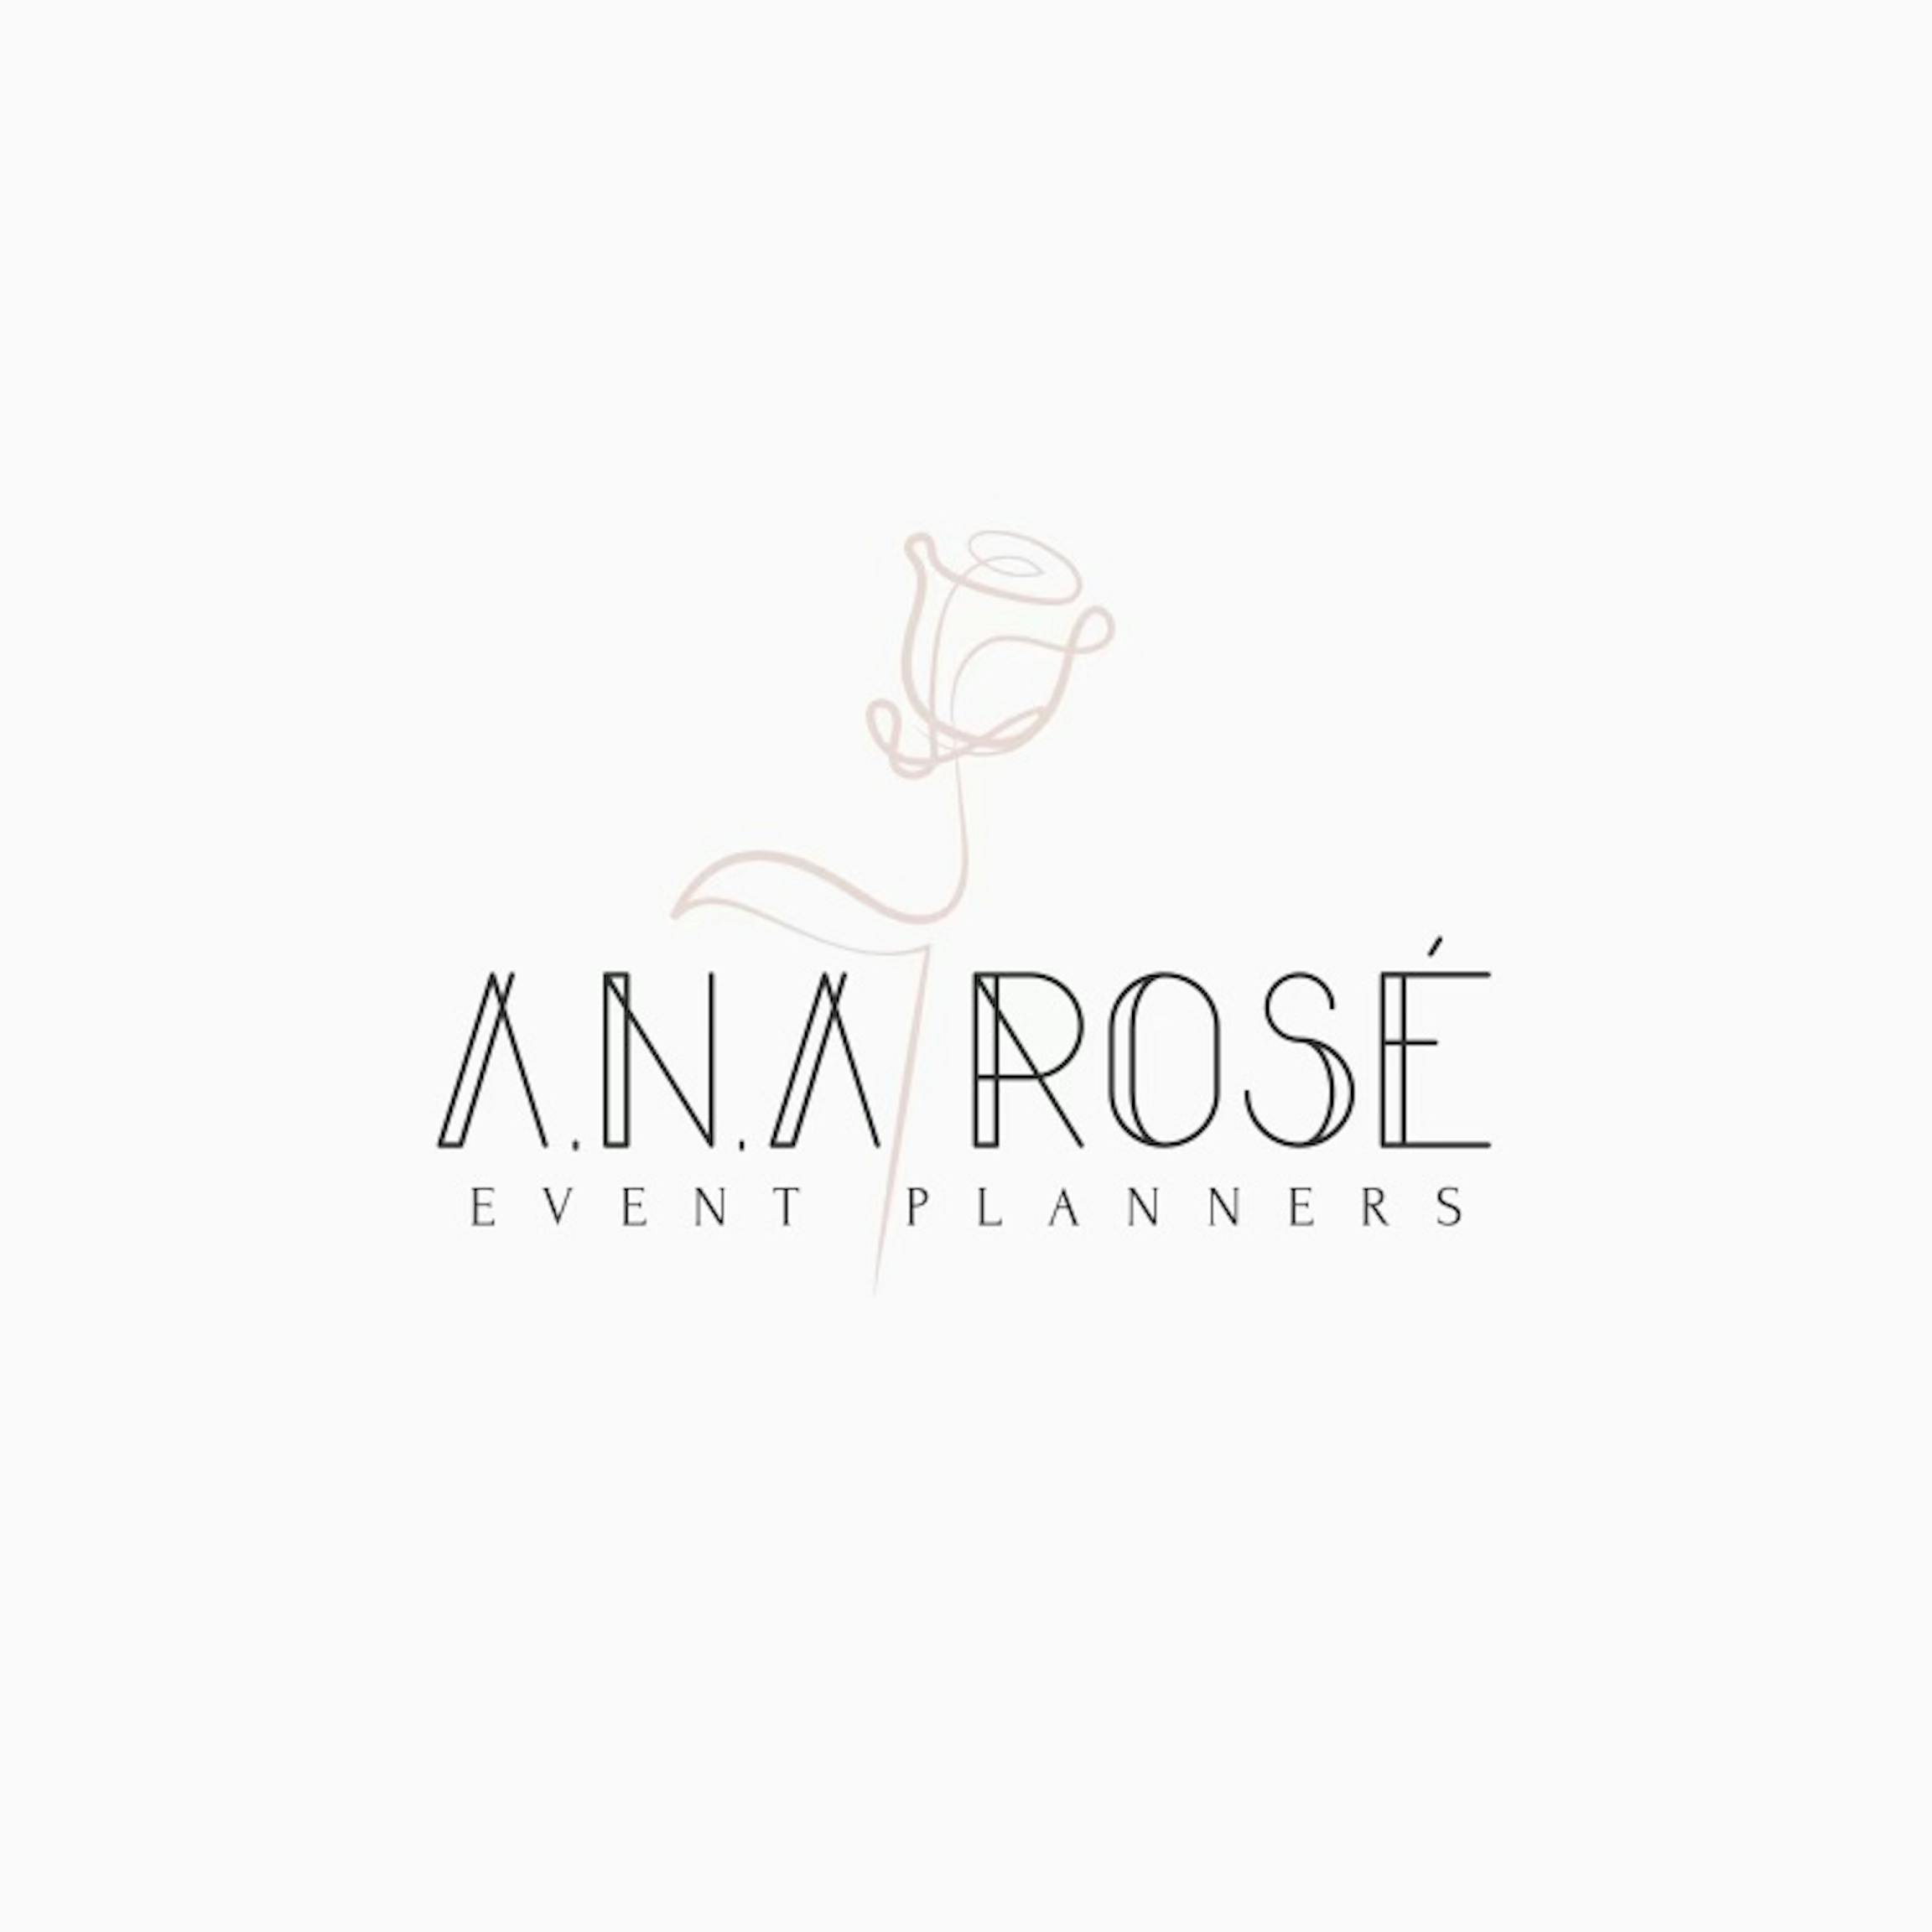 Review from Ana